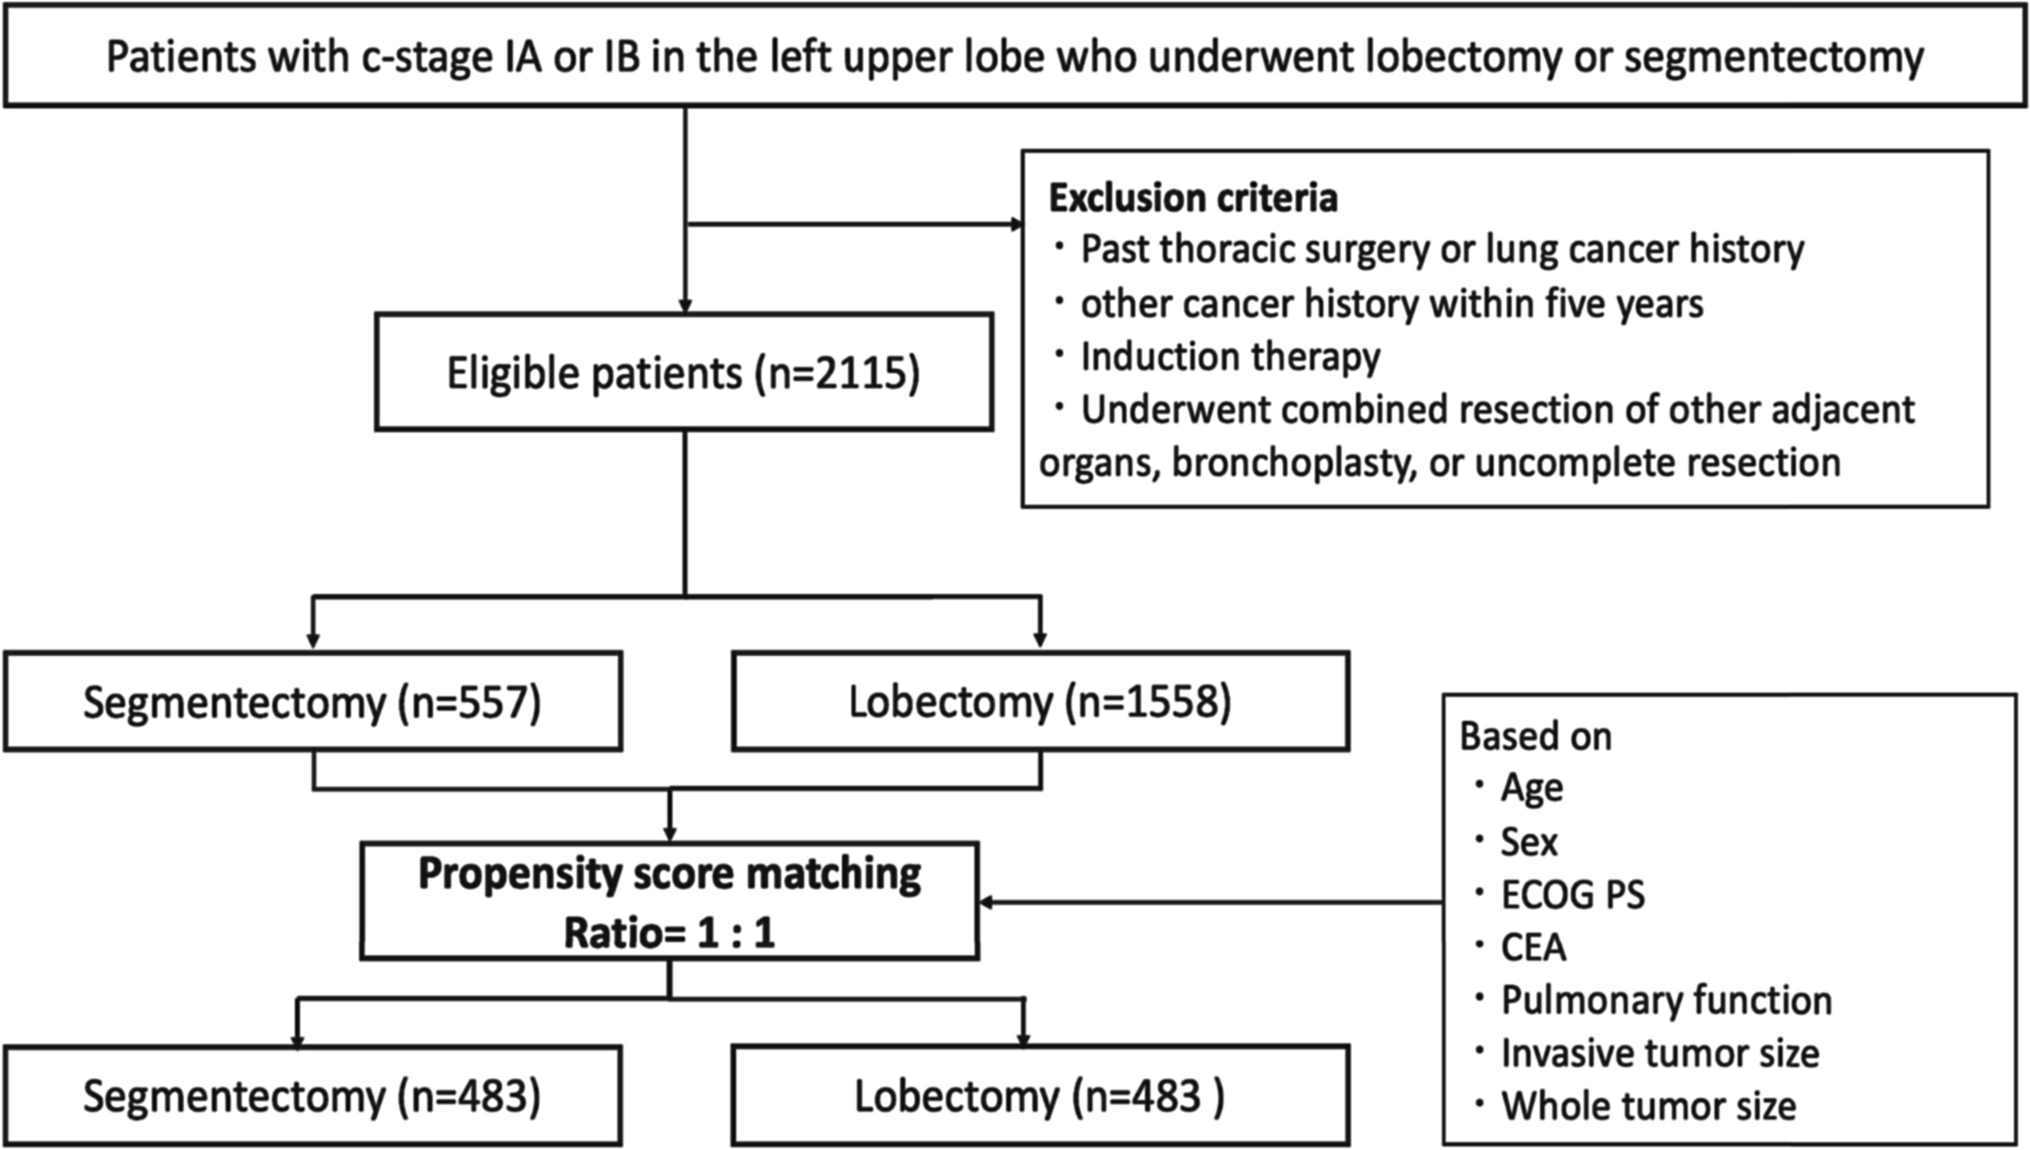 Clinical outcomes of left upper segmentectomy vs. lobectomy for early non-small-cell lung cancer: a nationwide database study in Japan